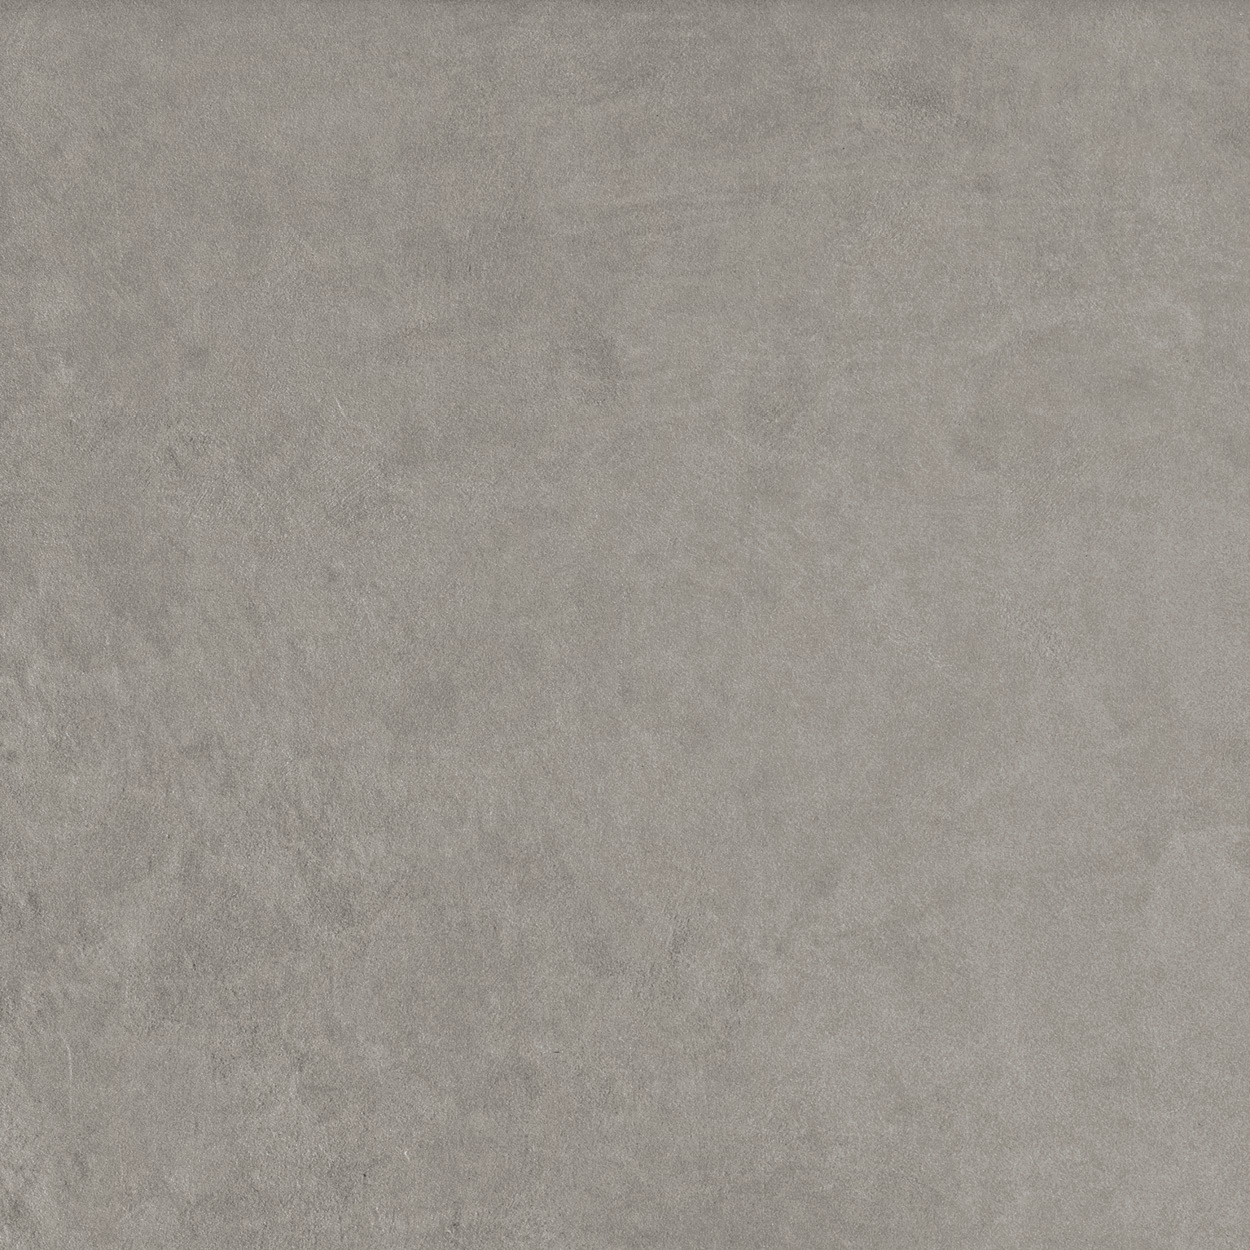 32 x 32 Seamless WR_02 Porcelain tile (SPECIAL ORDER ONLY)